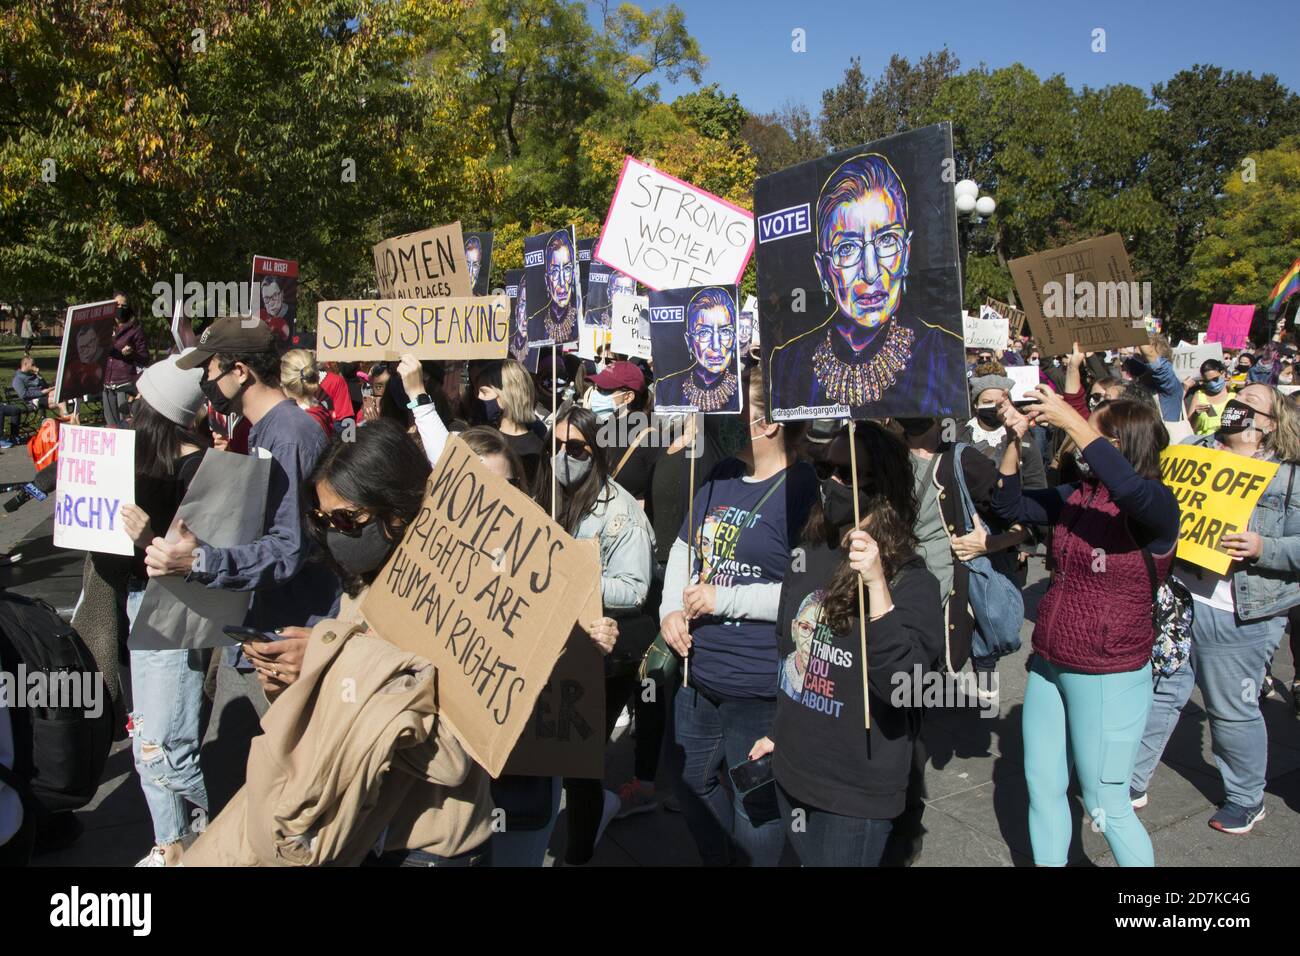 Men march with women in many cities around the world at an International Women's March on October 17, 2020 speaking out for the rights of women as well as all forms of injustice around the world. (New York City) Stock Photo